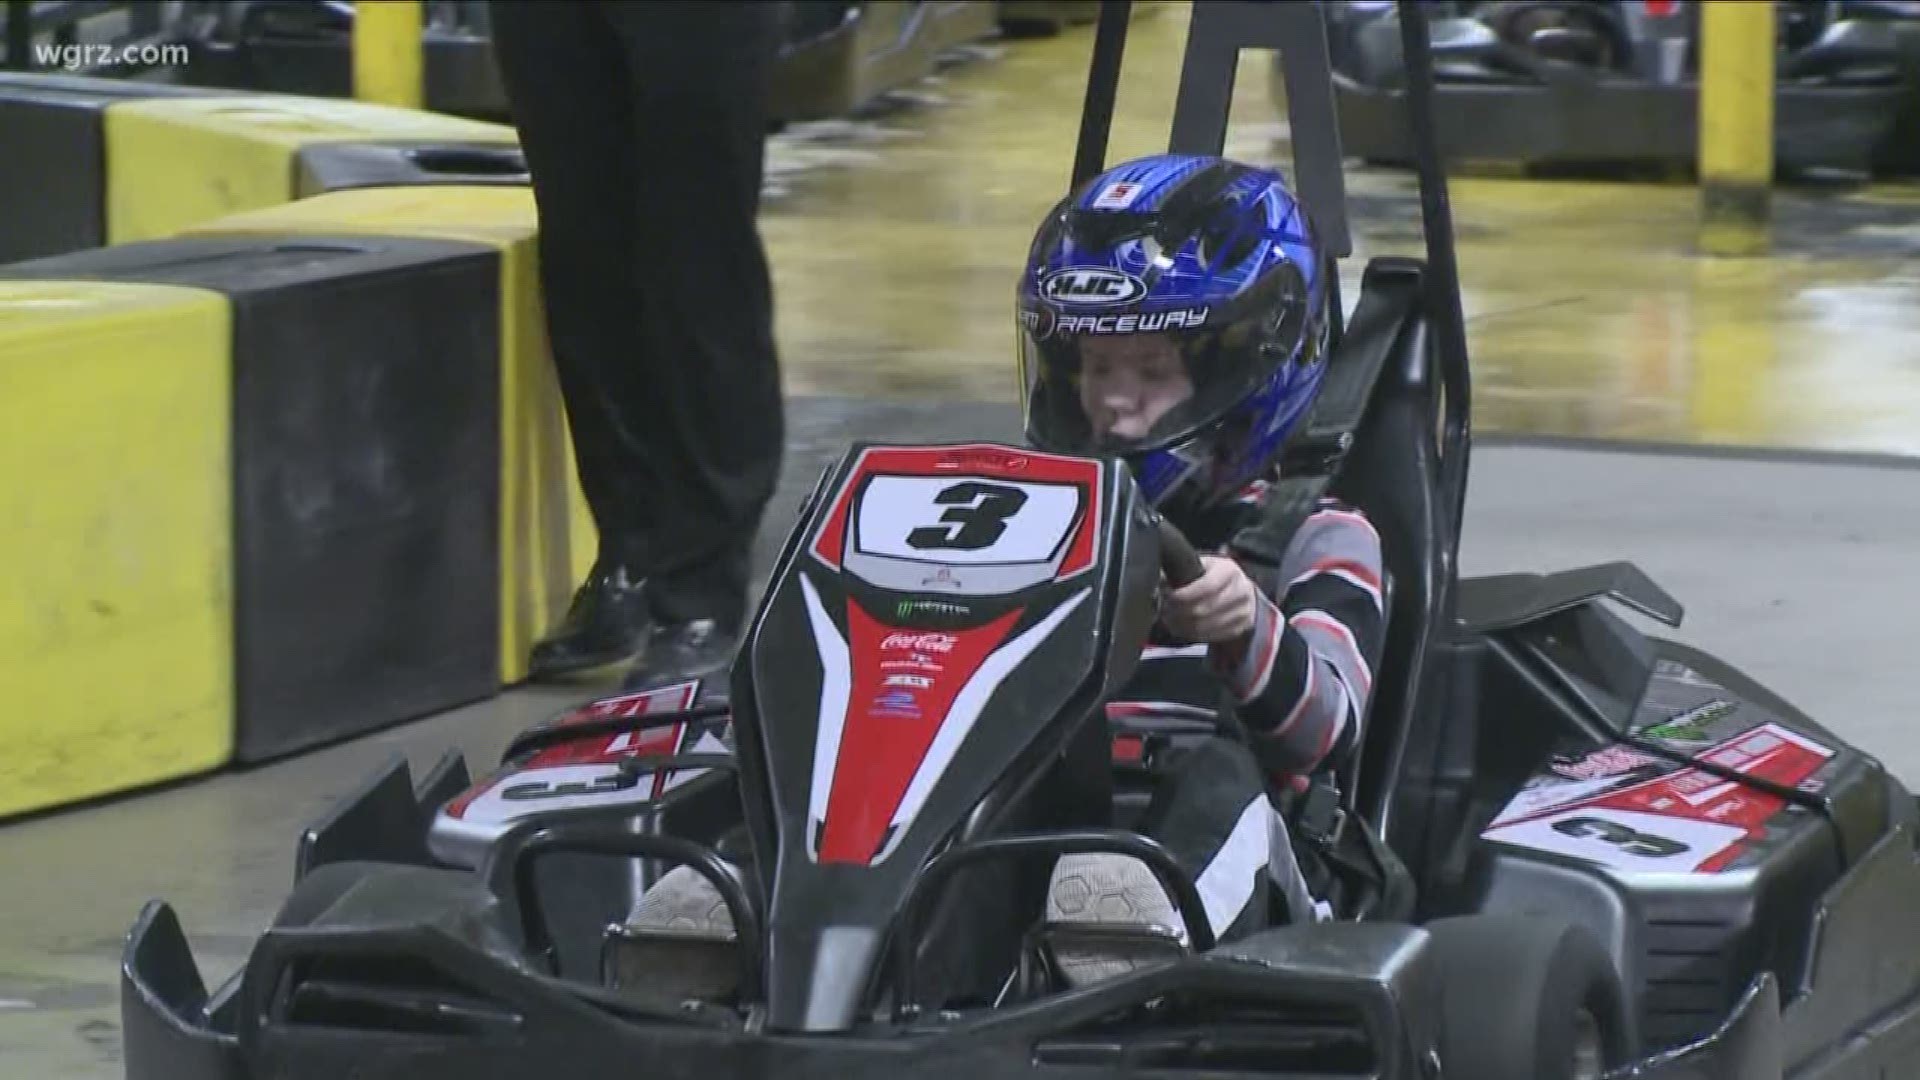 Visually impaired kids got a chance to drive go karts today.